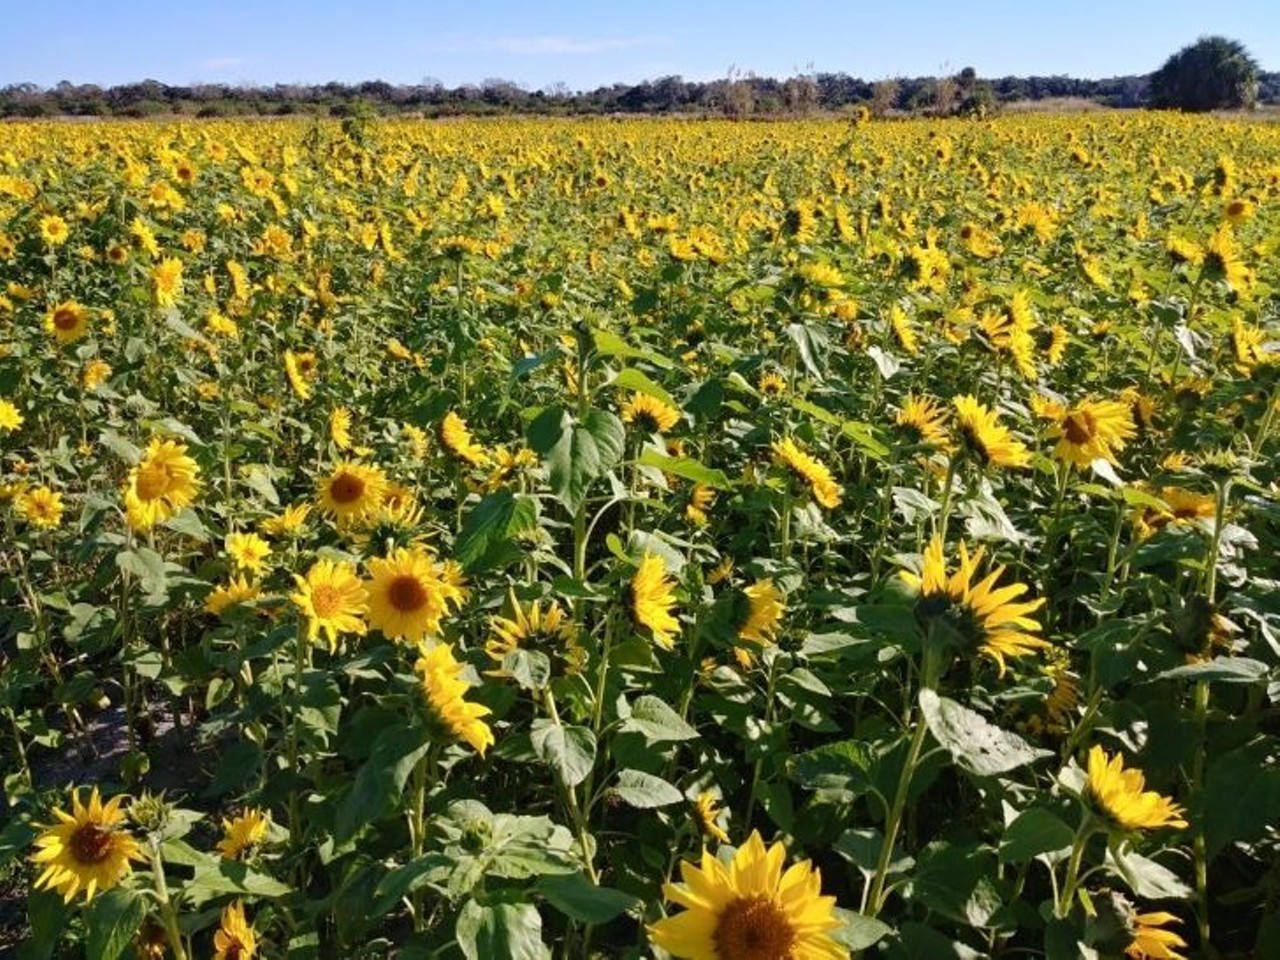 Sledd&#146;s U-Pick Farm 
Burkholm Road and Dixie Way, Mims
Sledd&#146;s over in Mims just replanted their sunflower fields, and hope to be open for picking in mid- to late April. Stop by to pick up some delightful sunflowers this spring.
Photo via Sledd&#146;s U-Pick Farm/Facebook</i